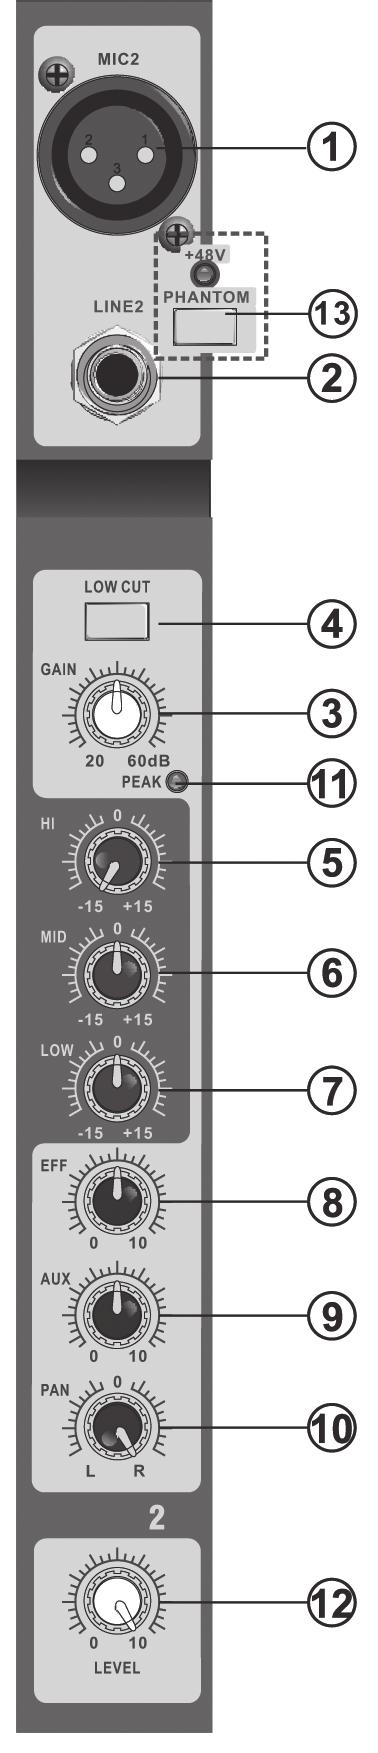 FEATURES 4 mono input channels and 2 stereo input channels. Frequency EQ on each input channel. Low-noise mic pre-amp on microphone inputs. Low cut filter for the mono channel.